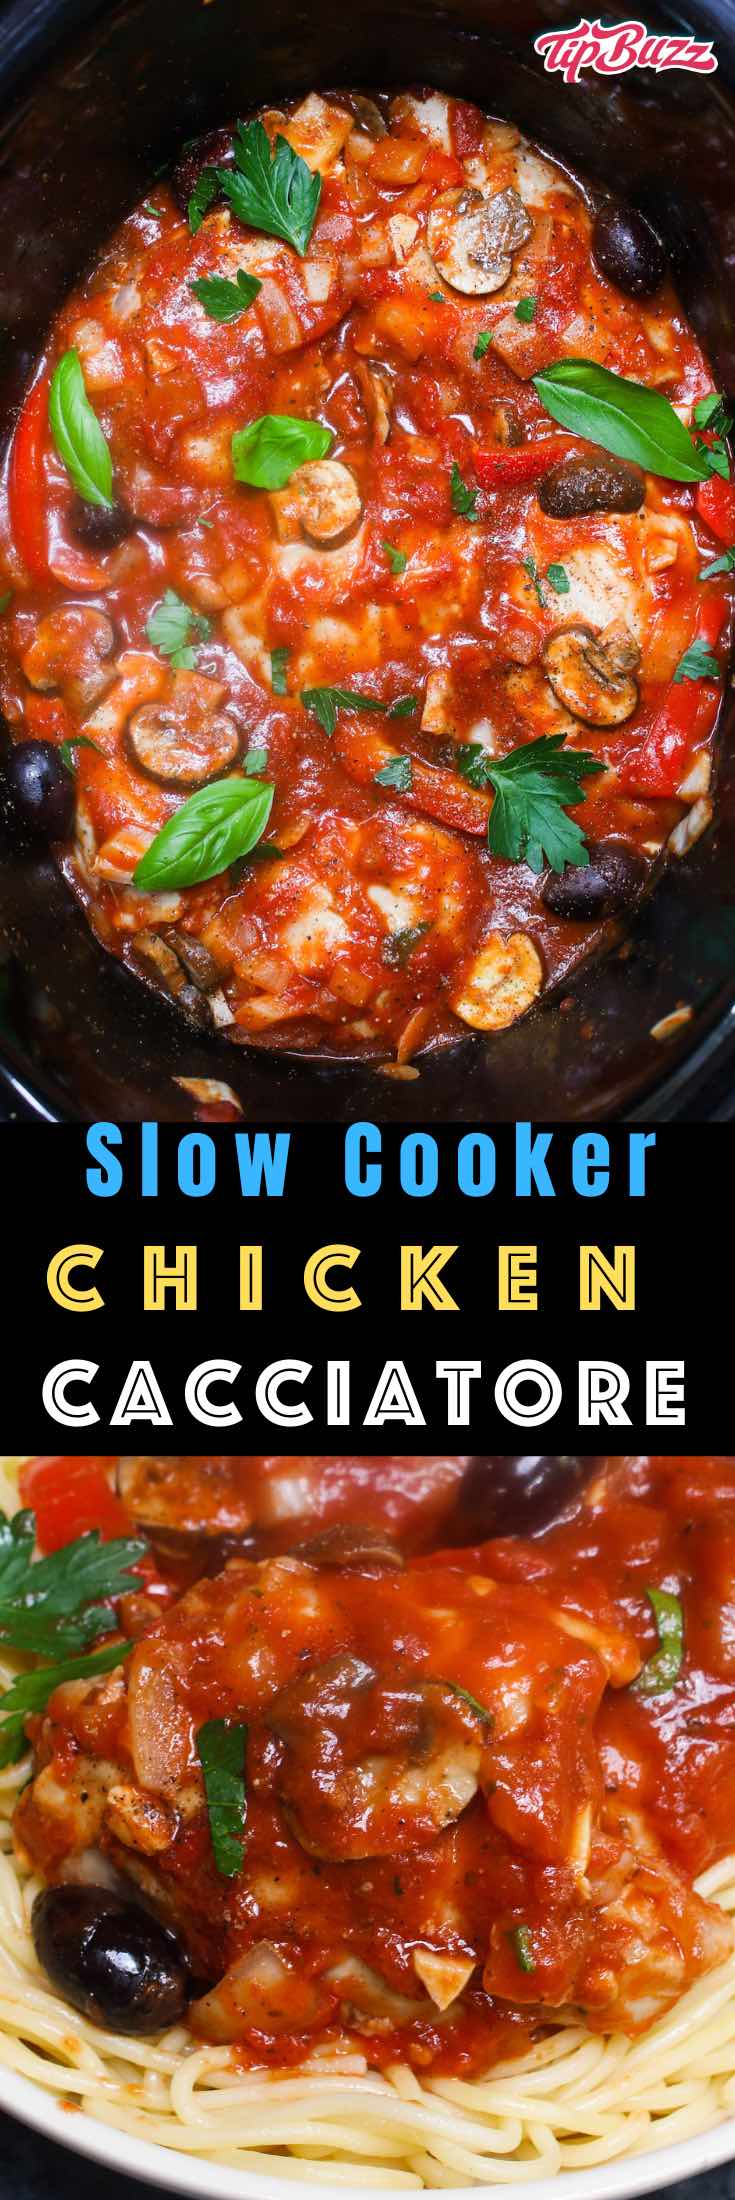 Crock Pot Chicken Cacciatore Super Easy And Flavorful Tipbuzz,Buckwheat Pancakes